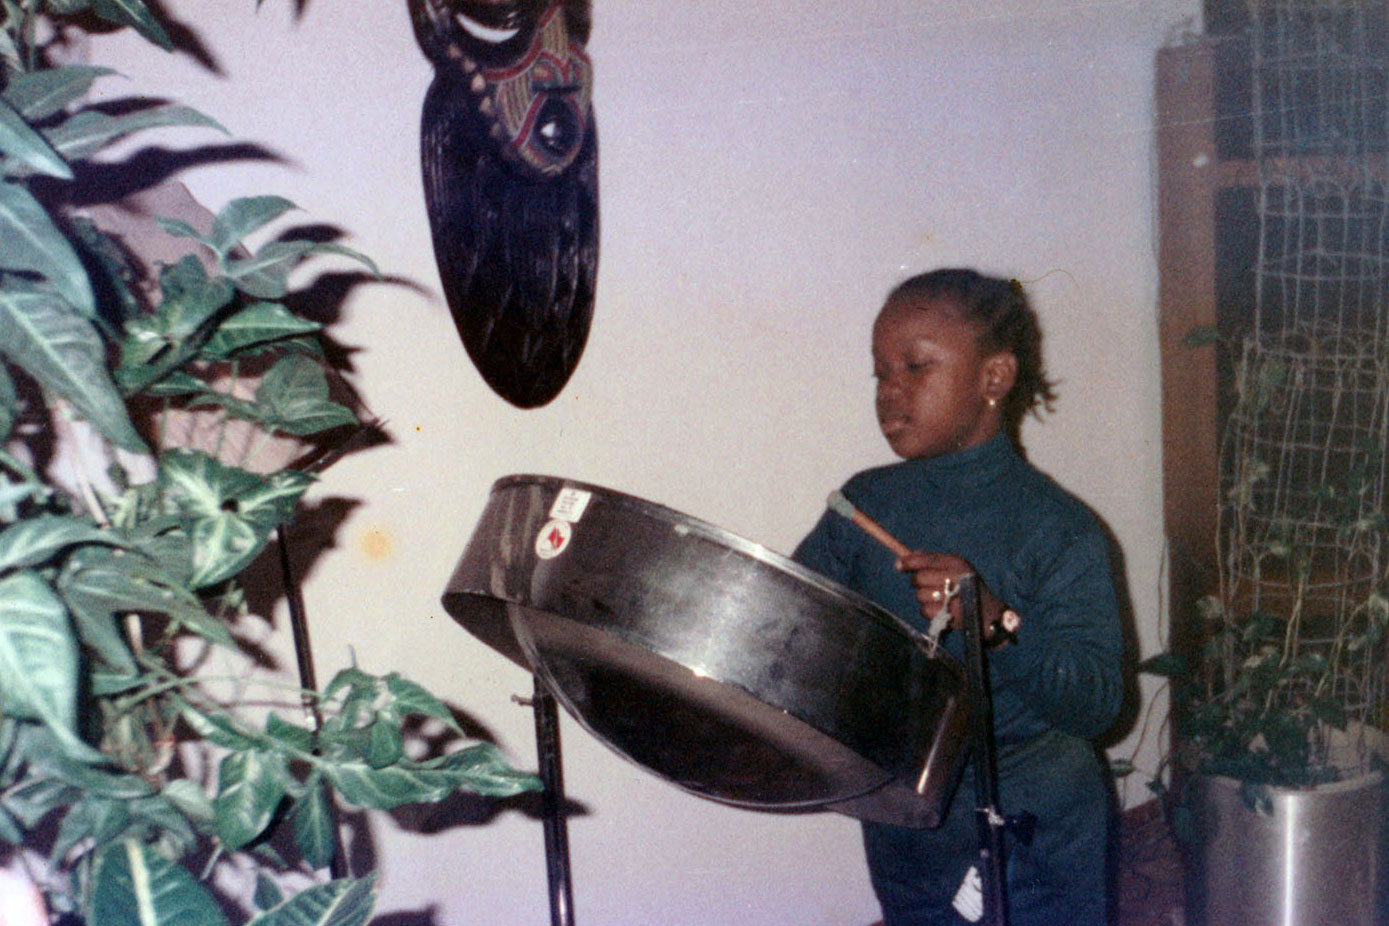 A young girl plays a steelpan drum, houseplants in the foreground and background, and a wooden mask on the wall.